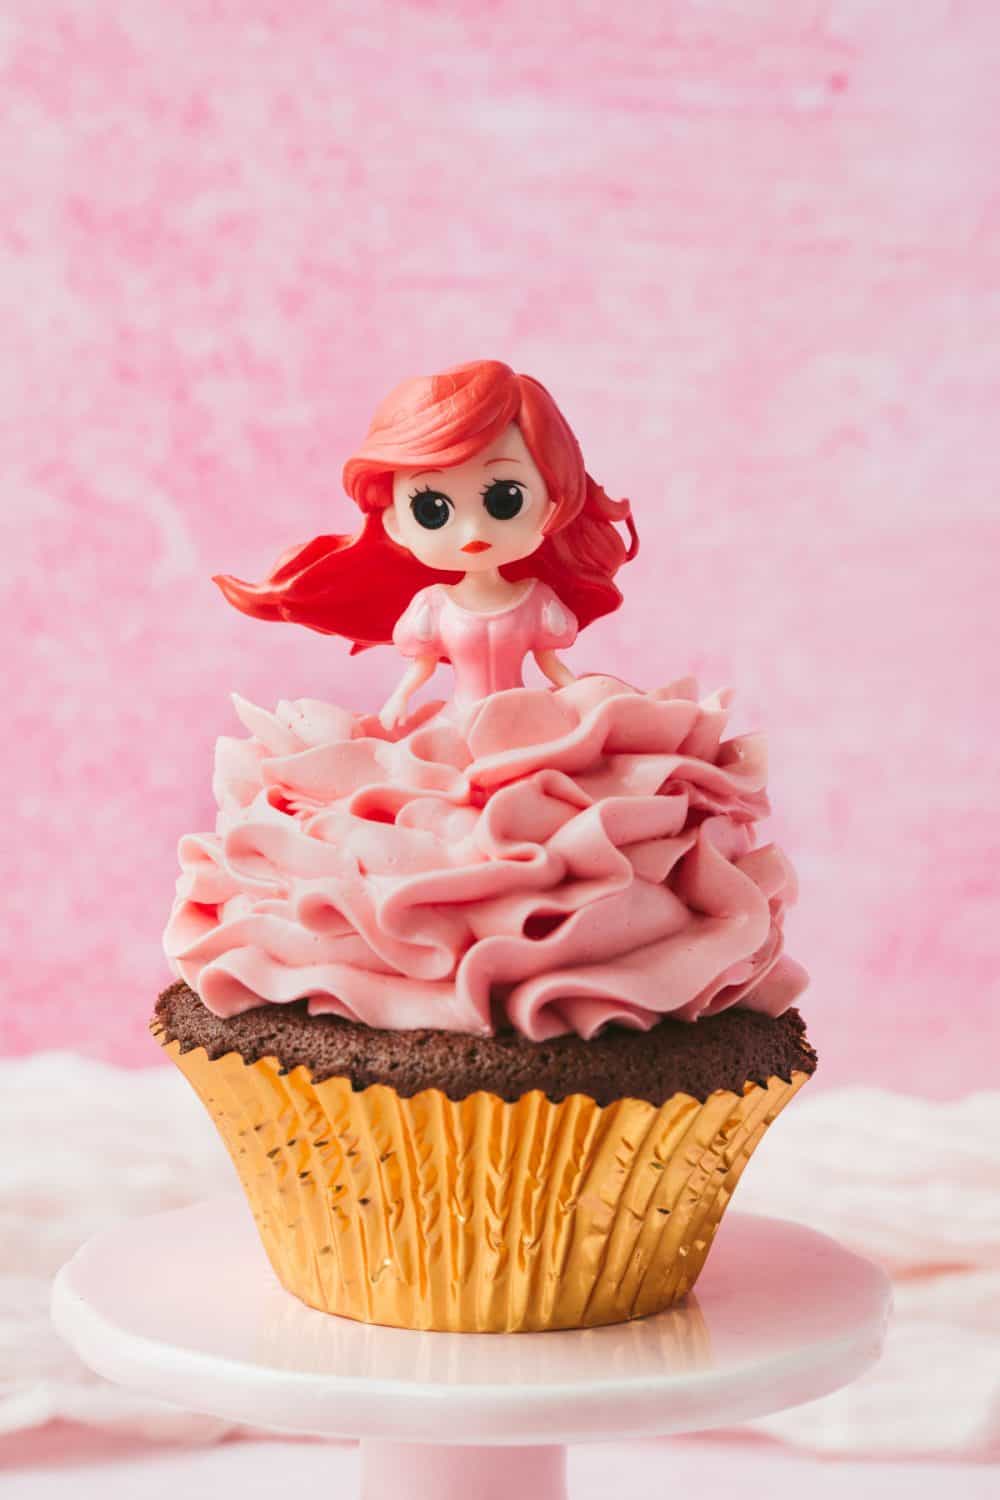 Disney princess Ariel on top of a chocolate cupcake covered in pink swiss meringue buttercream. 